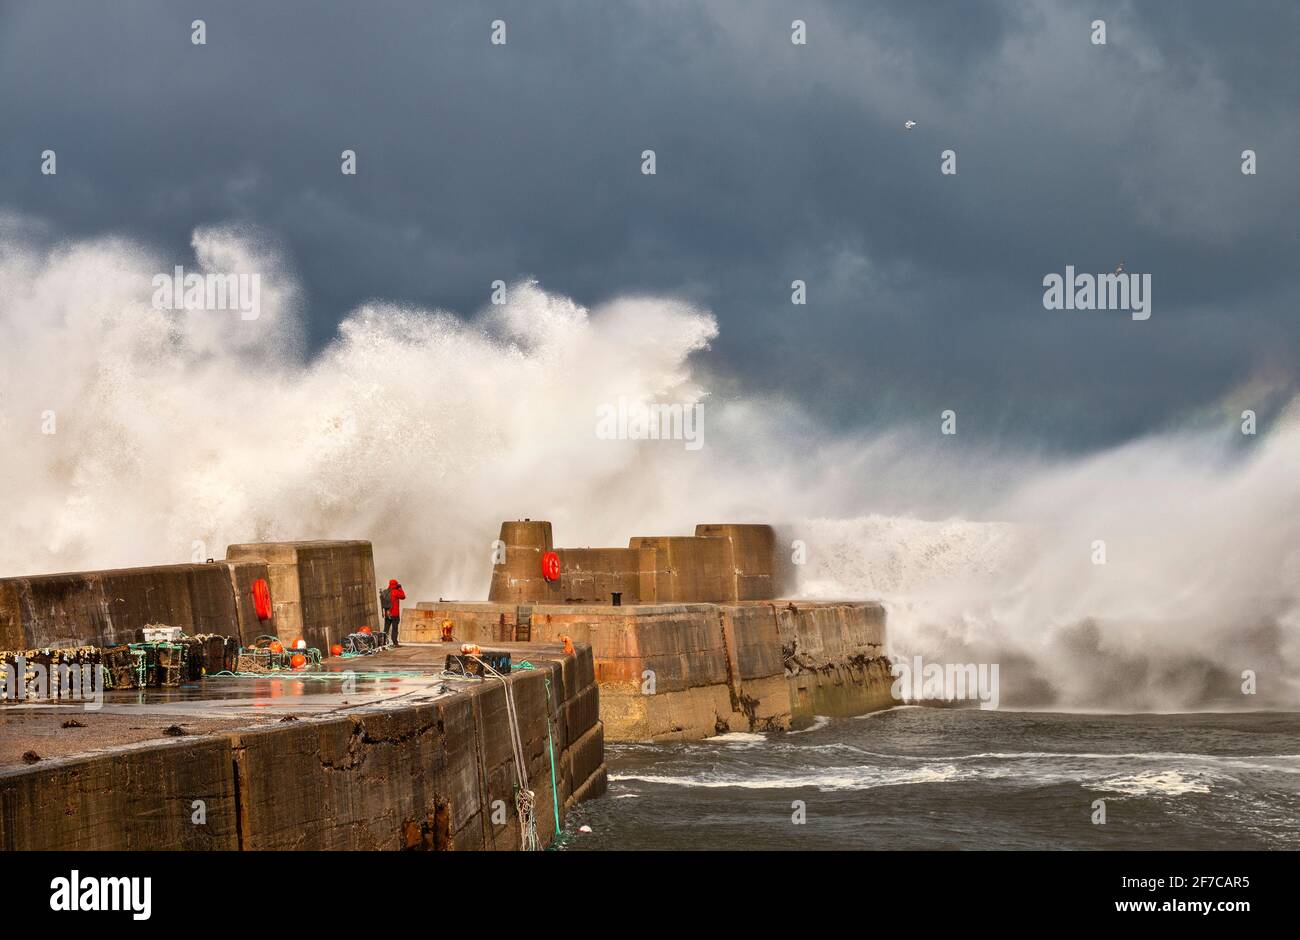 PORTKNOCKIE MORAY COAST SCOTLAND STORM AND VERY HIGH WINDS WAVES CRASHING AND BREAKING OVER A MAN AND THE HARBOUR WALLS Stock Photo